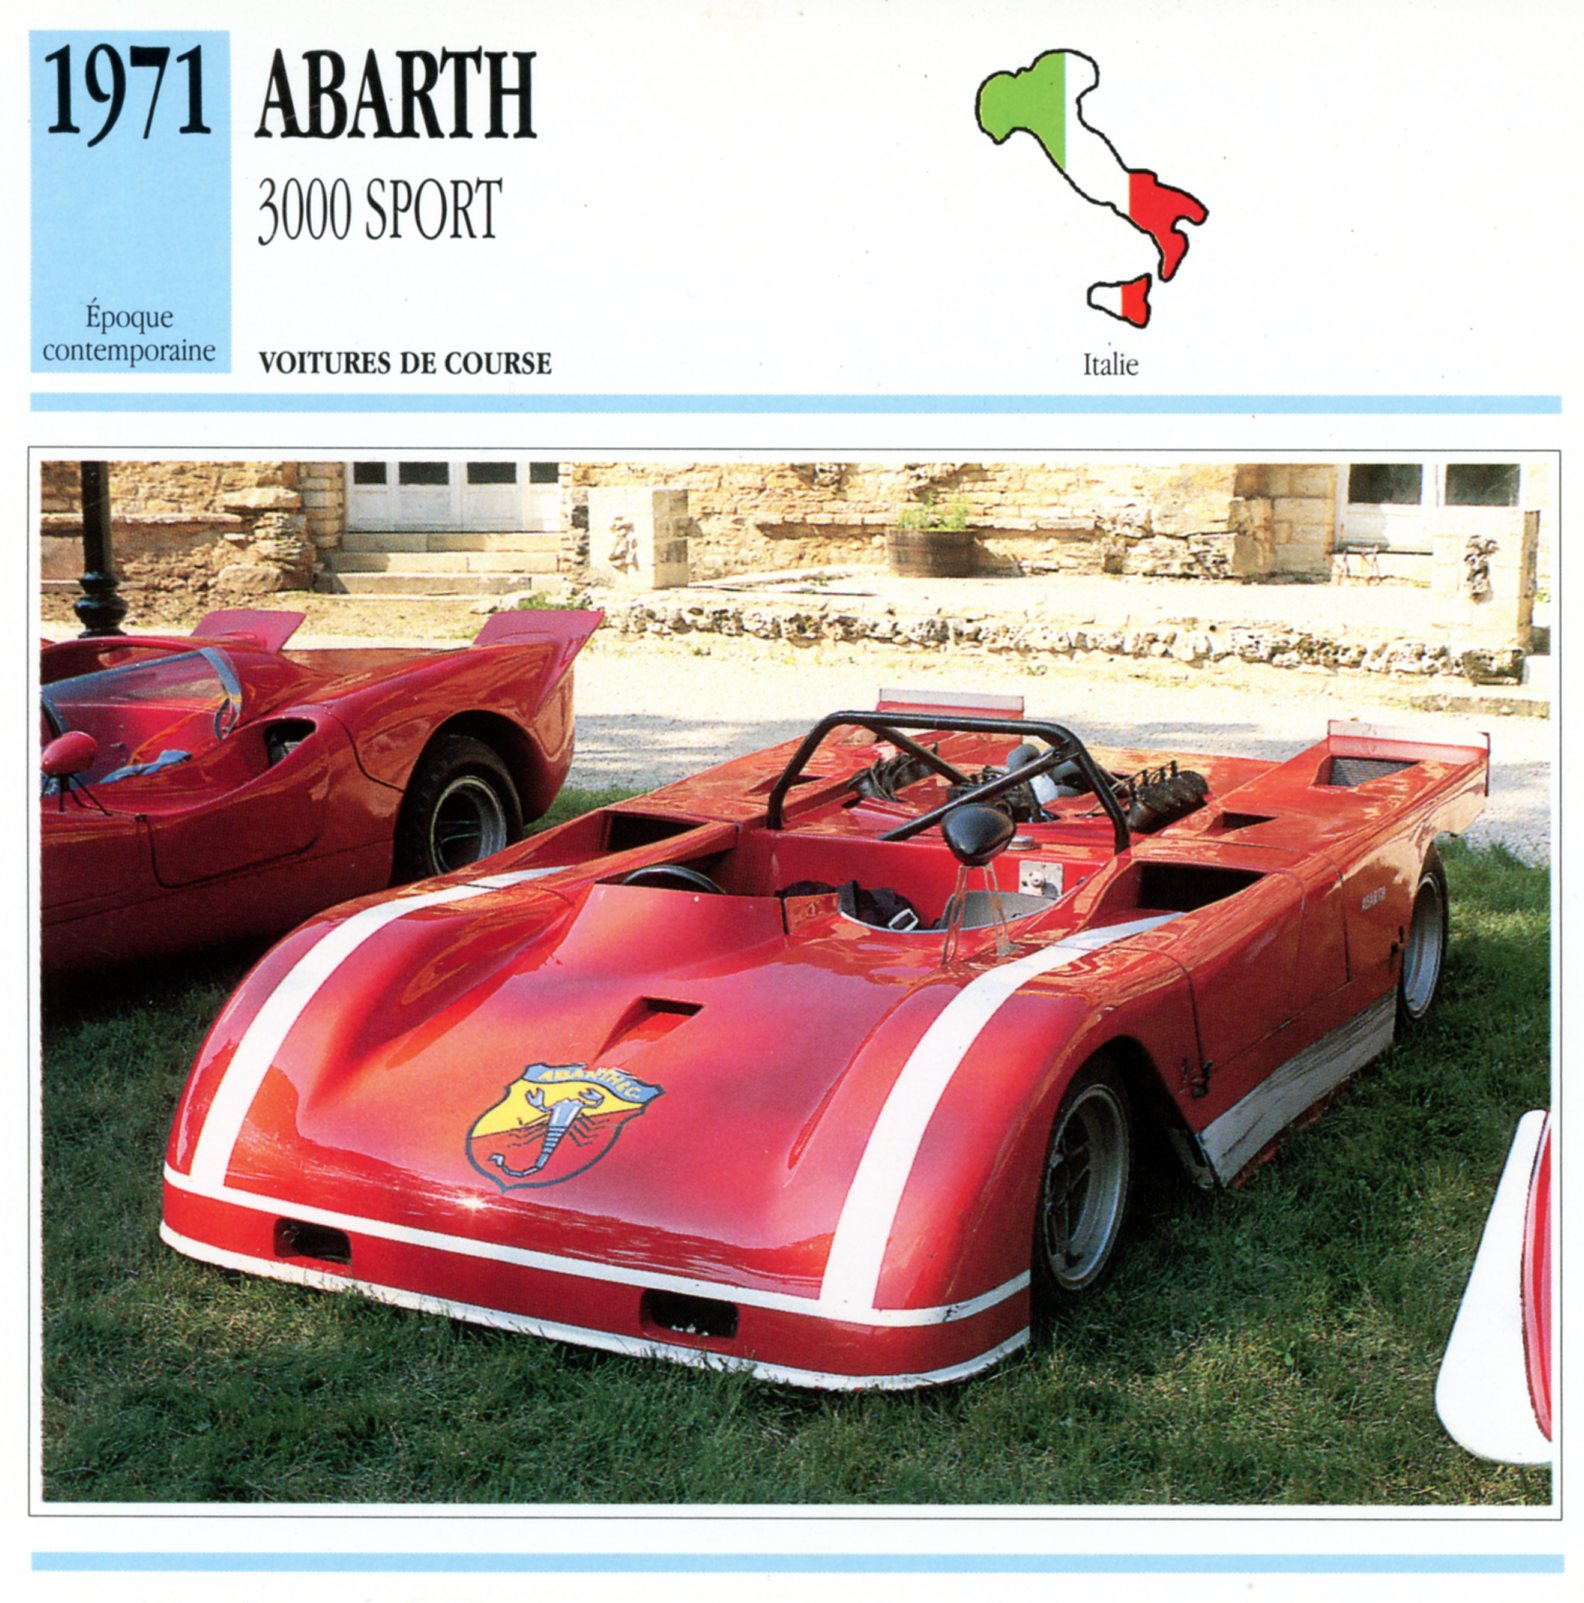 FICHE-AUTO-ABARTH-3000-SPORT-1971-LEMASTERBROCKERS-CARS-CARD